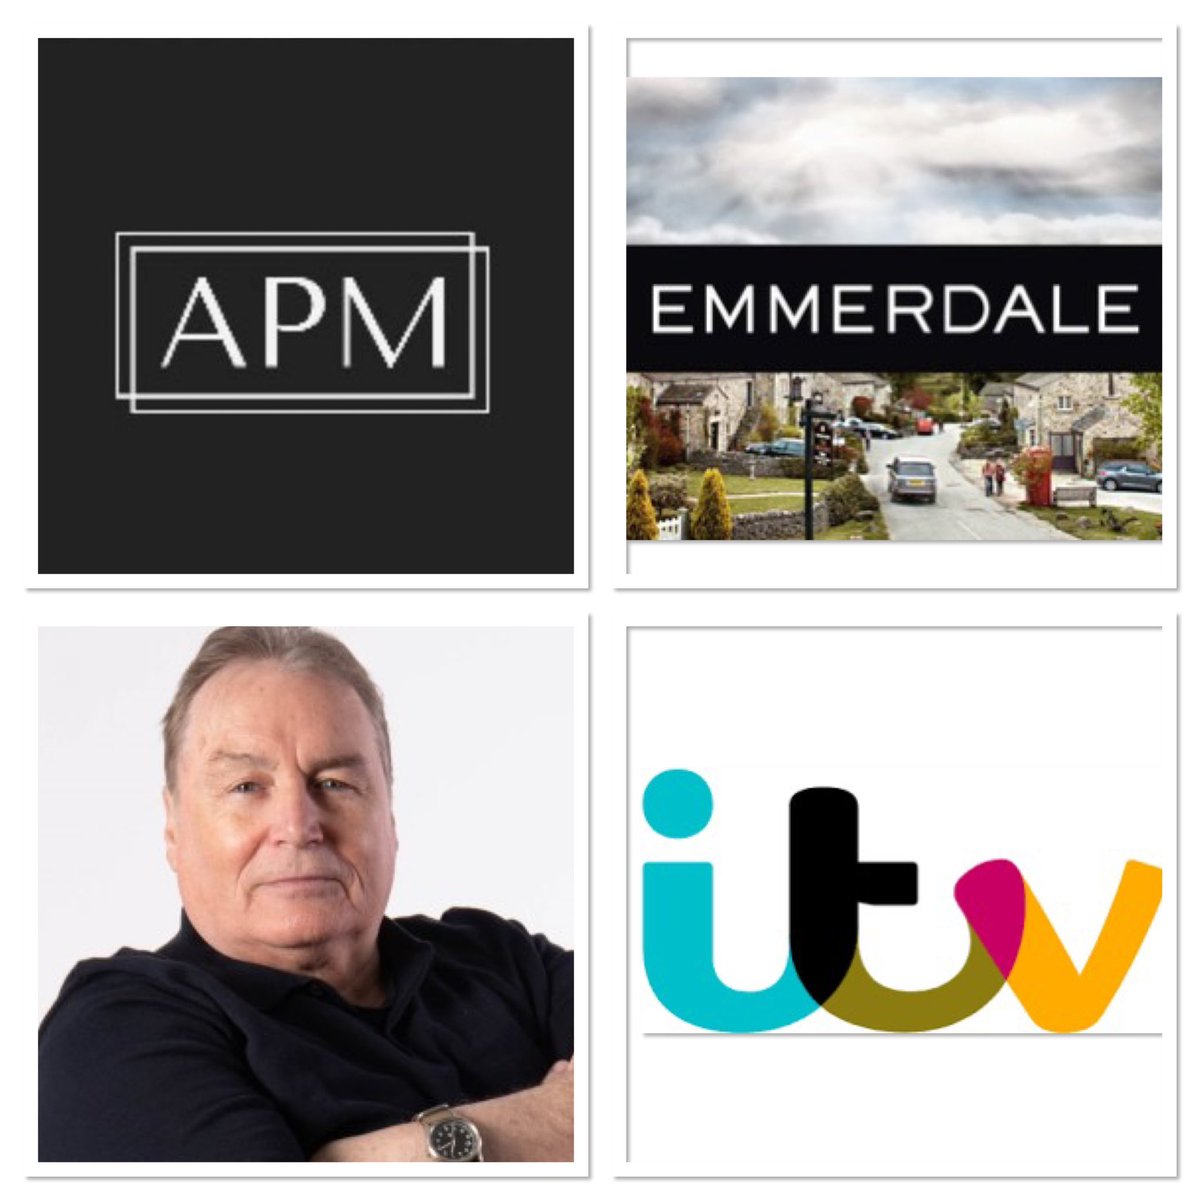 Our lovely Kevin Davids has been working on Emmerdale this week and he’s had a fabulous time on set . Look forward to watching you on our screens again soon Kevin !